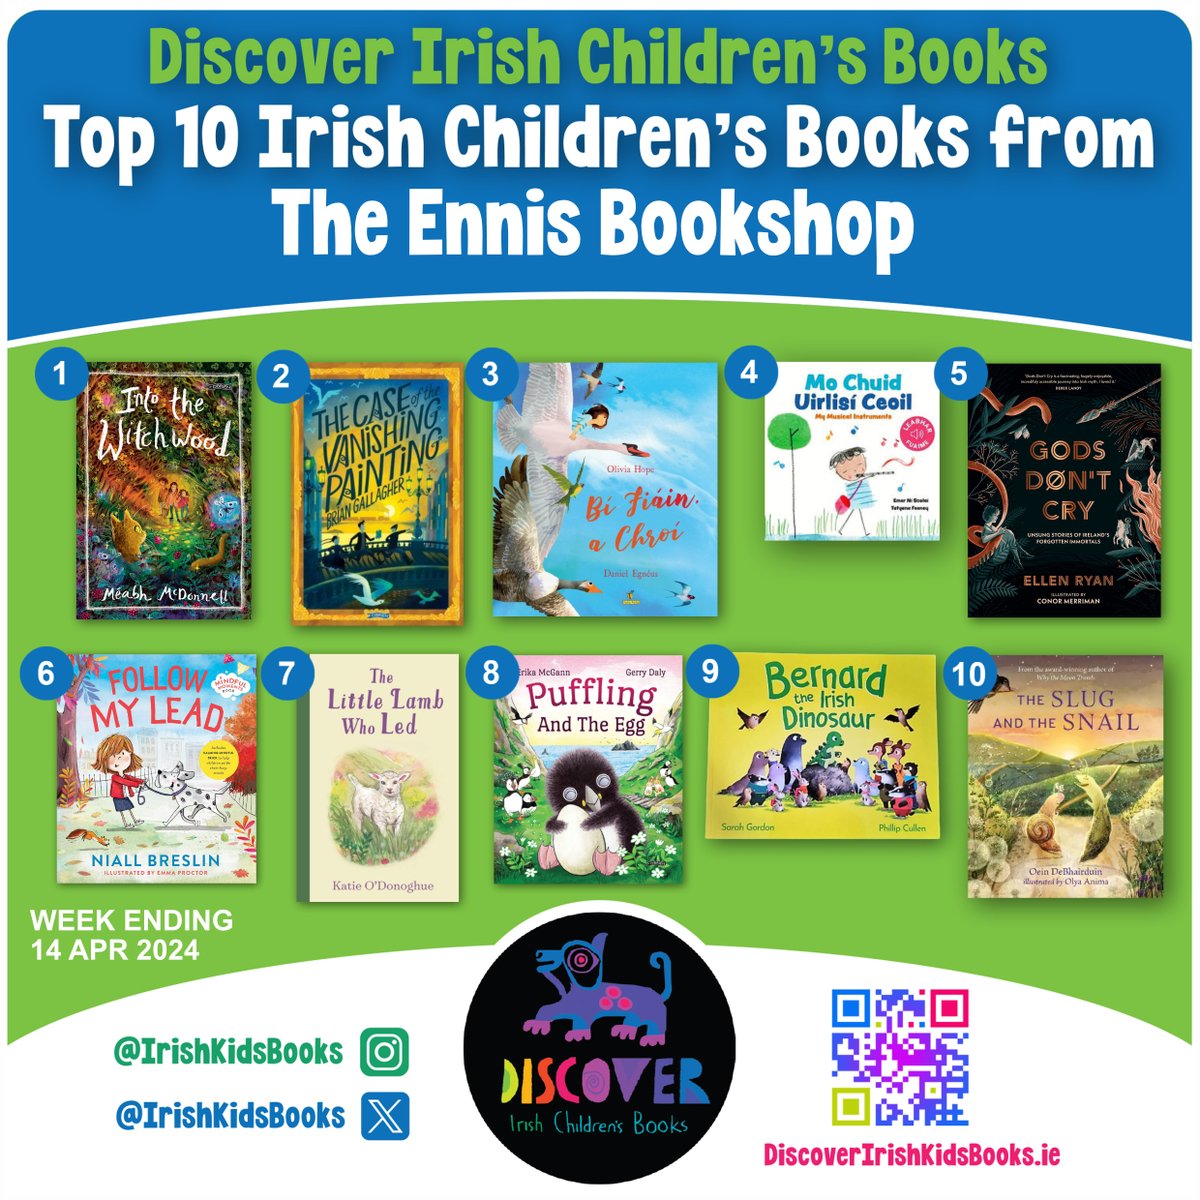 This week's Top 10 Irish Children's Books chart is from The Ennis Bookshop. 
Congratulations to no 1 @meabhmcdonnell with her debut novel, Into the Witchwood! ☘️☘️☘️#DiscoverIrishKidsBooks 
Download this poster here: discoveririshkidsbooks.ie/blog/